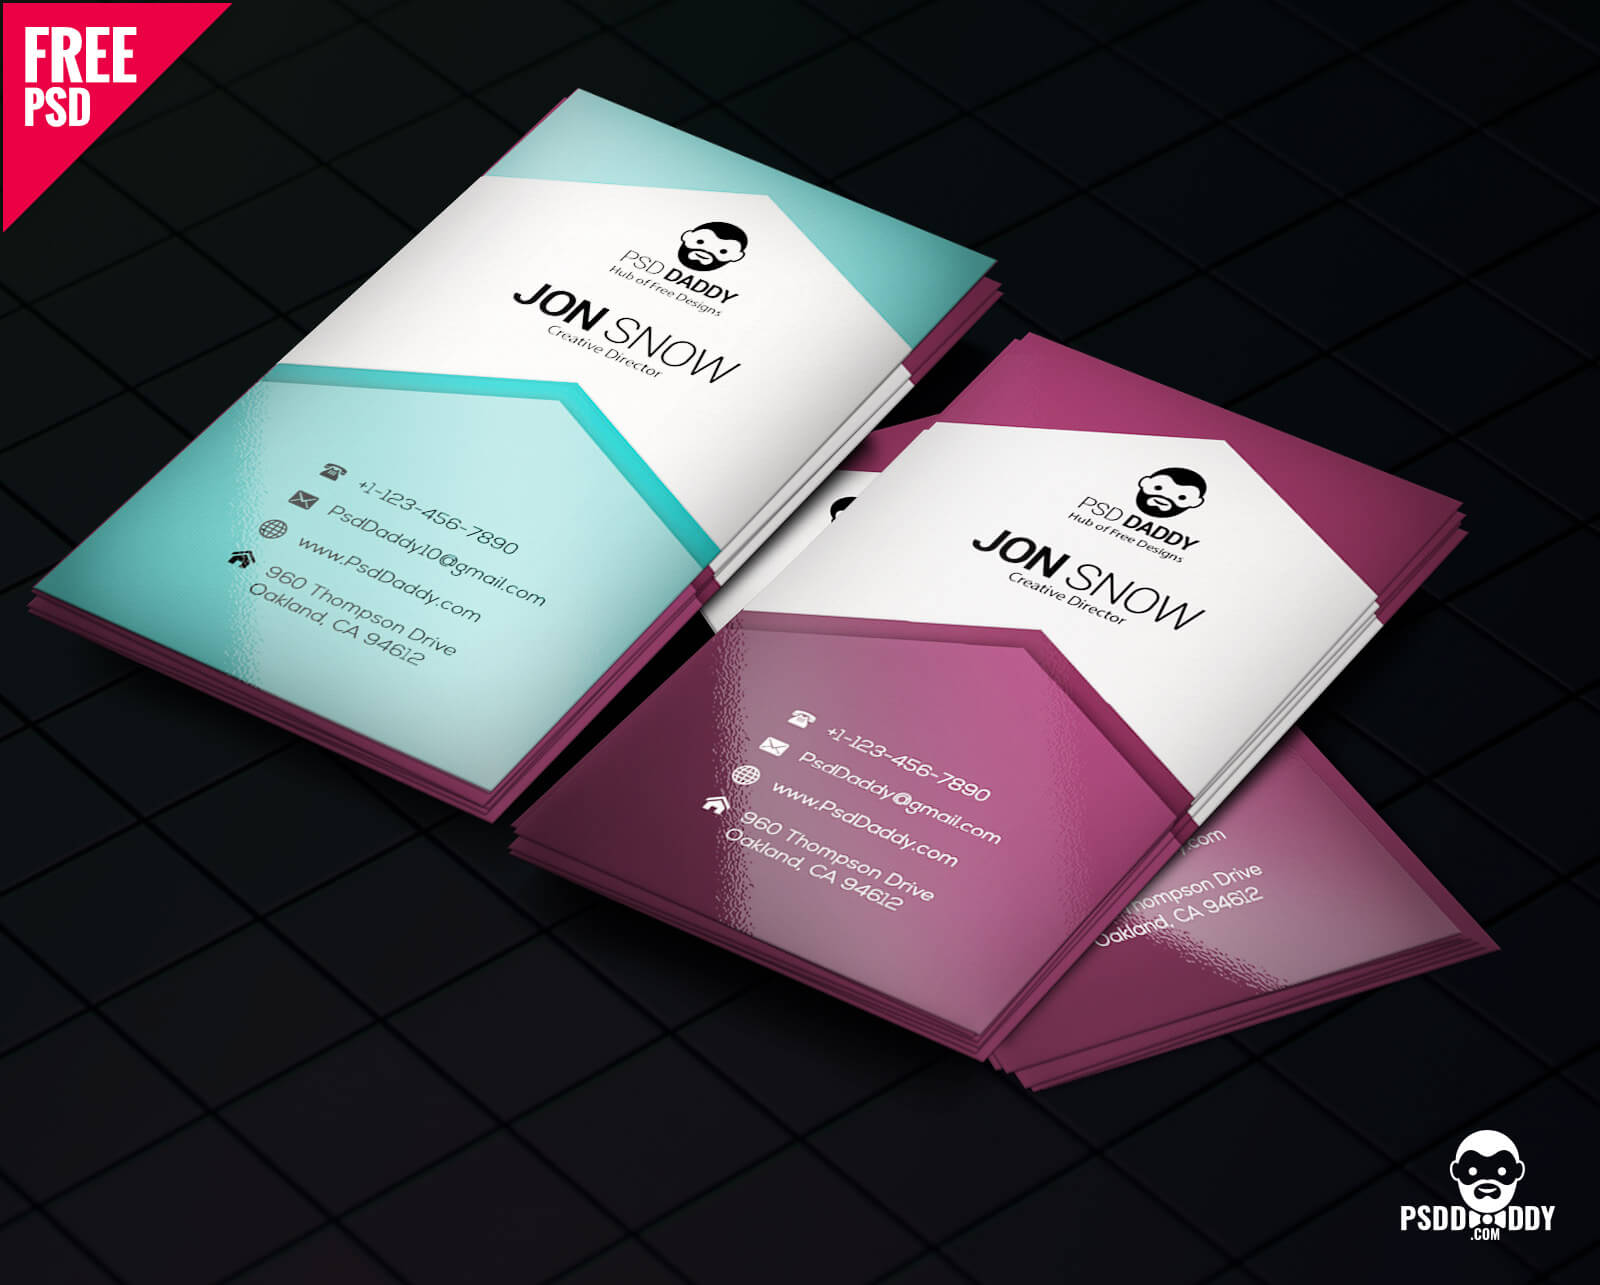 Download]Creative Business Card Psd Free | Psddaddy Inside Business Card Maker Template